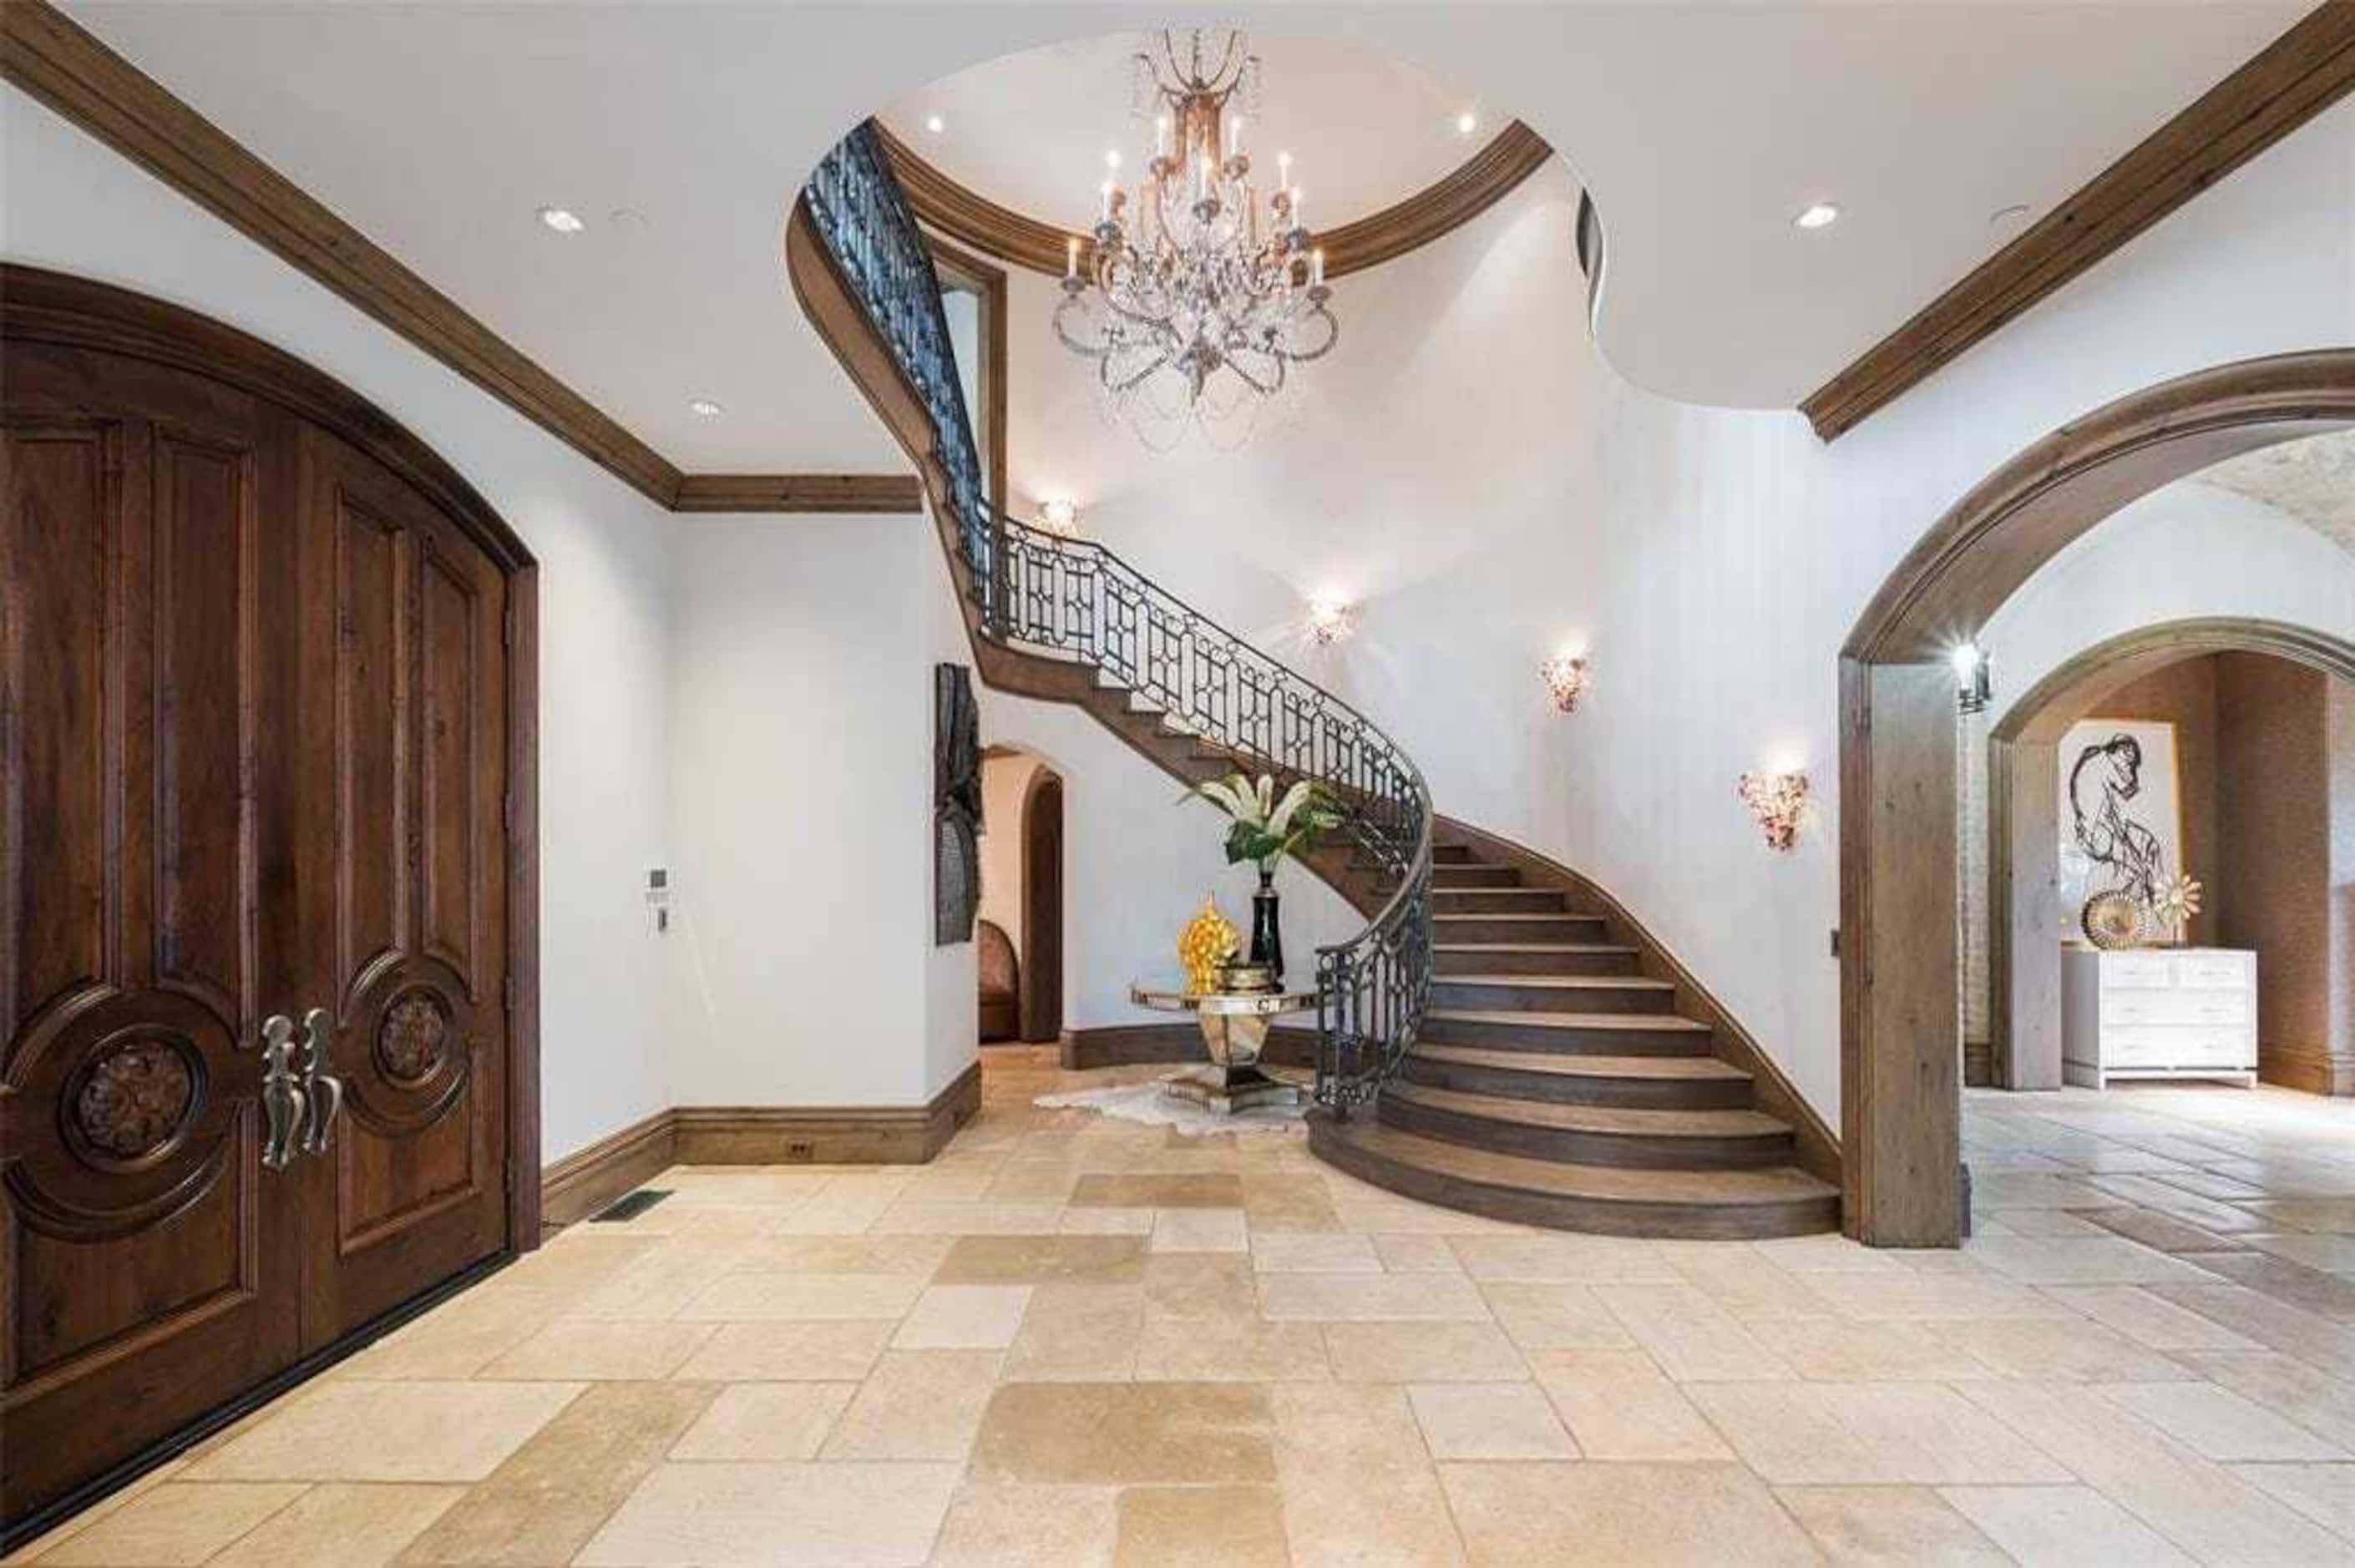 The $17.9 million home at 10331 Strait Ln. in Dallas' Preston Hollow neighborhood was the...